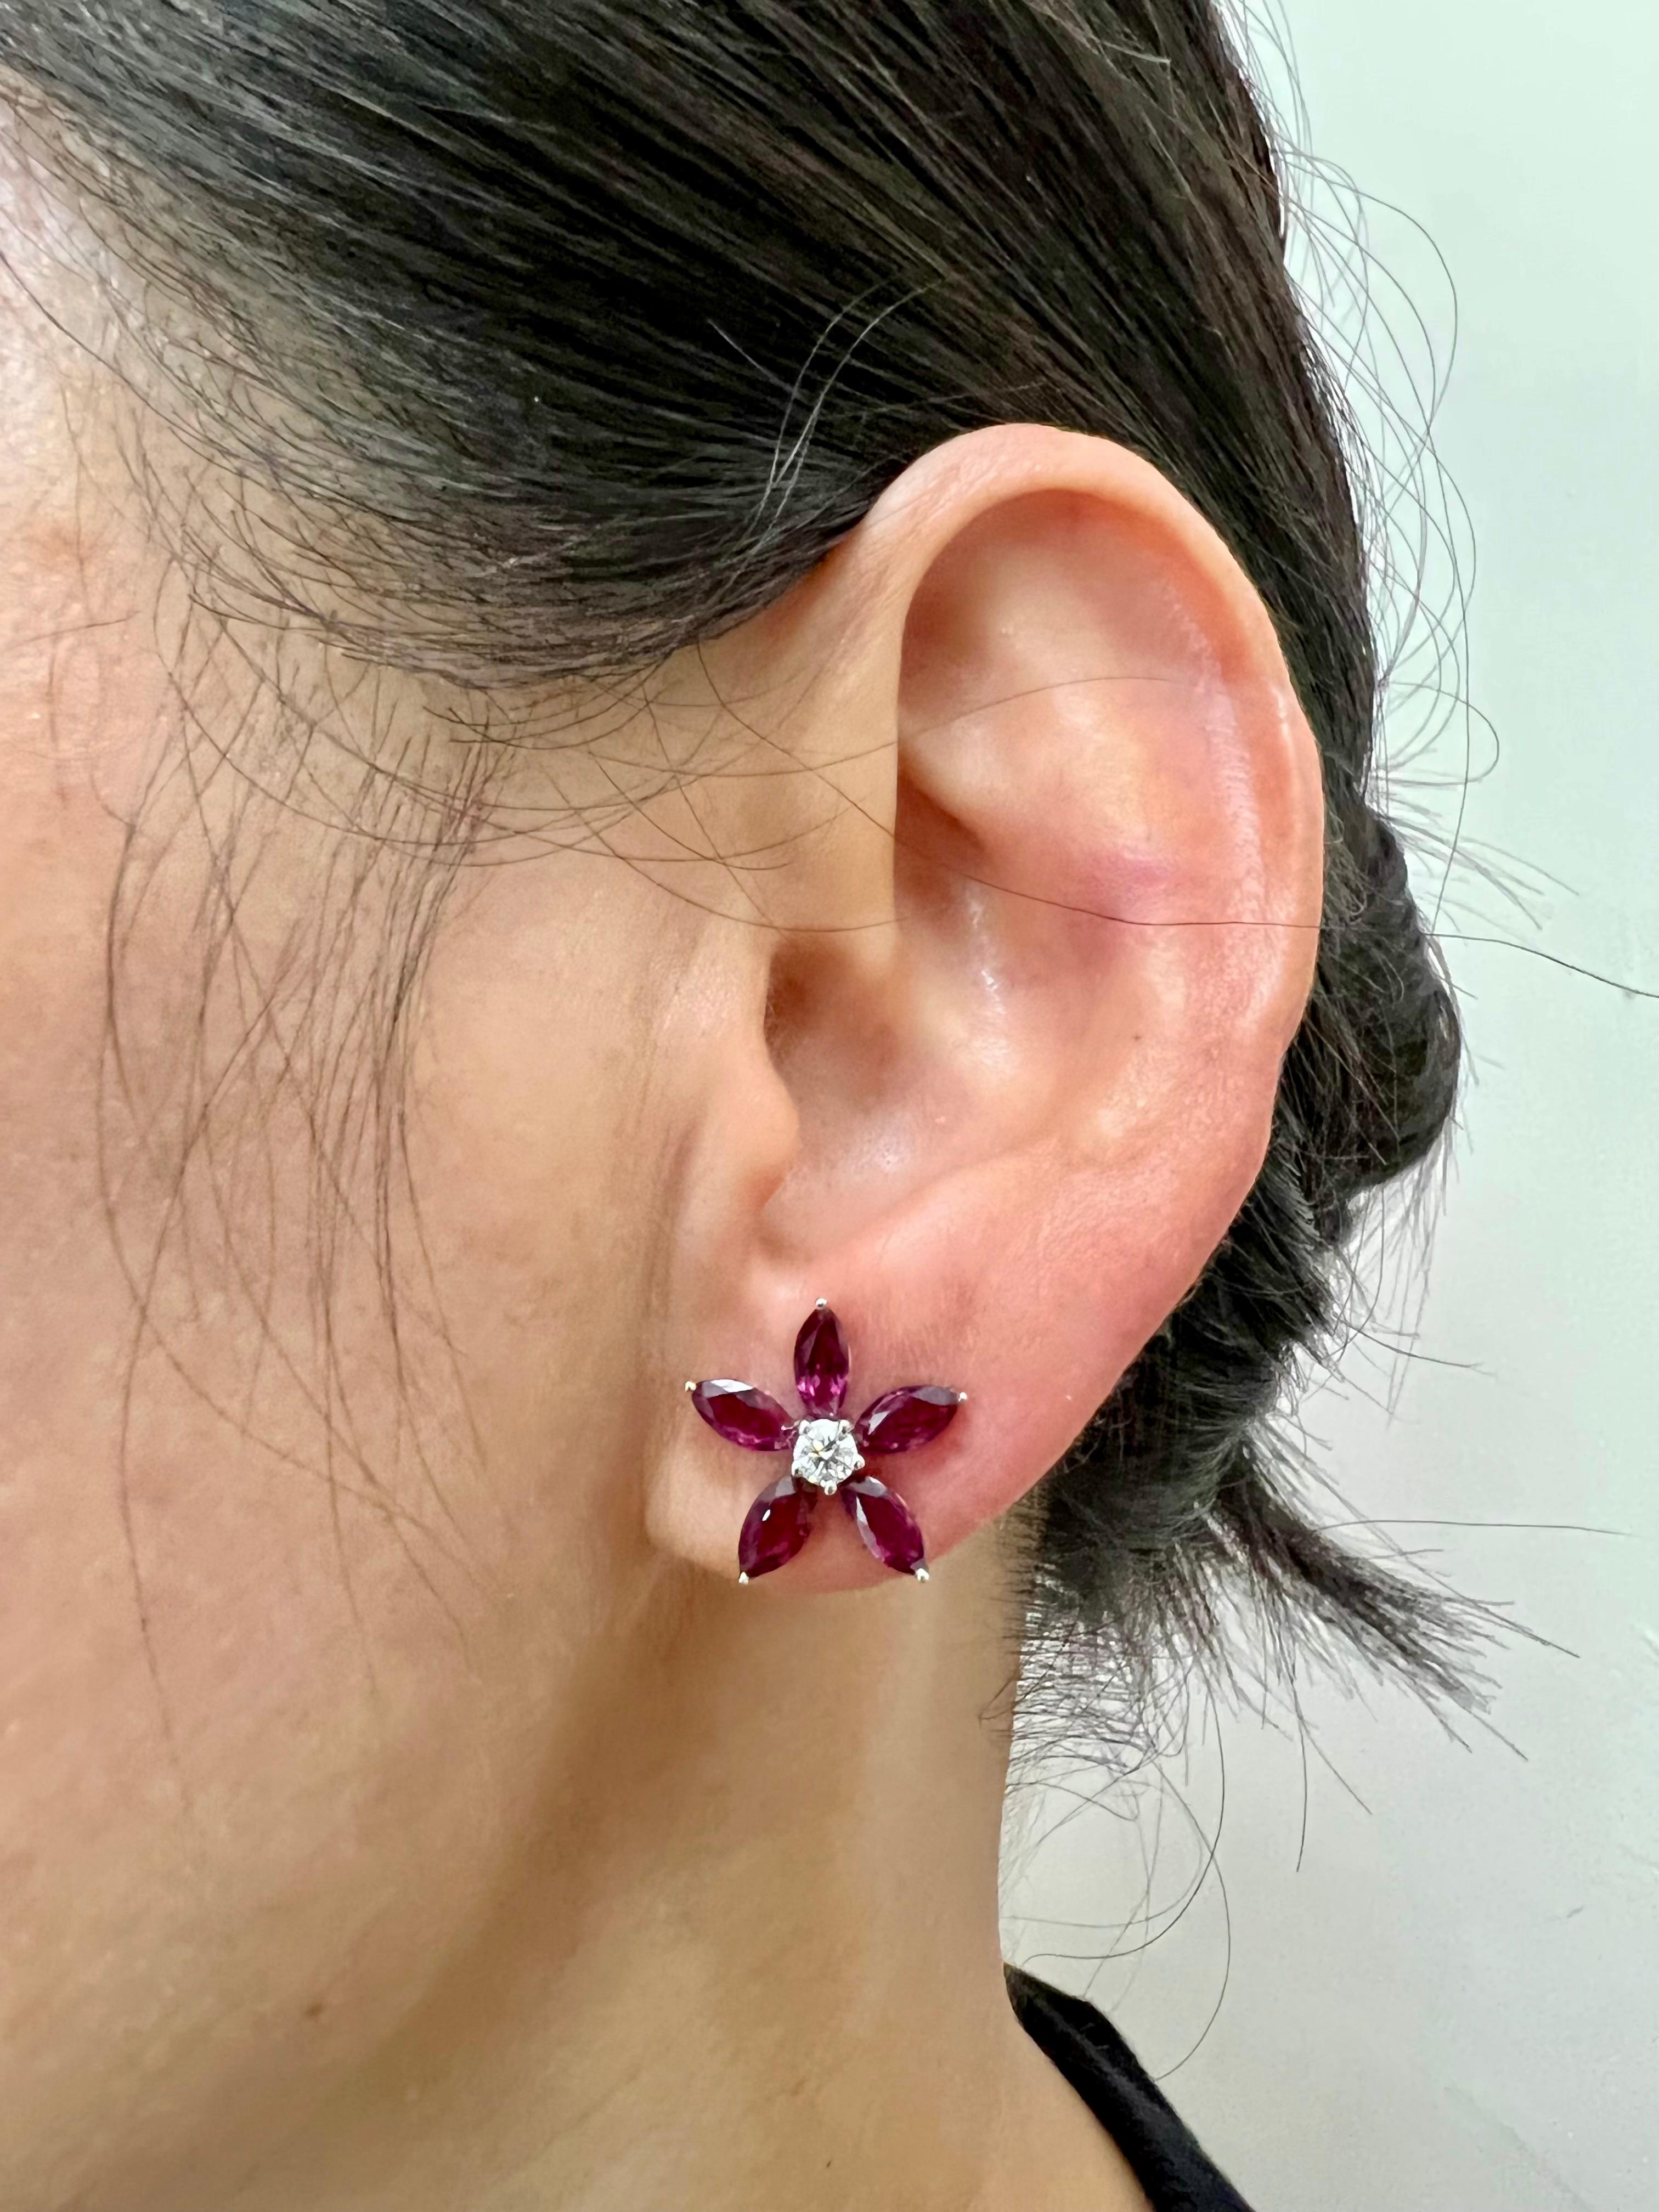 Please check out the HD video! These earrings GLOW! Here is a fantastic pair of bright red Ruby (very hard to capture in photos or video) and diamond stud earrings. This flower earrings are absolutely beautiful and simple. The earrings are set in